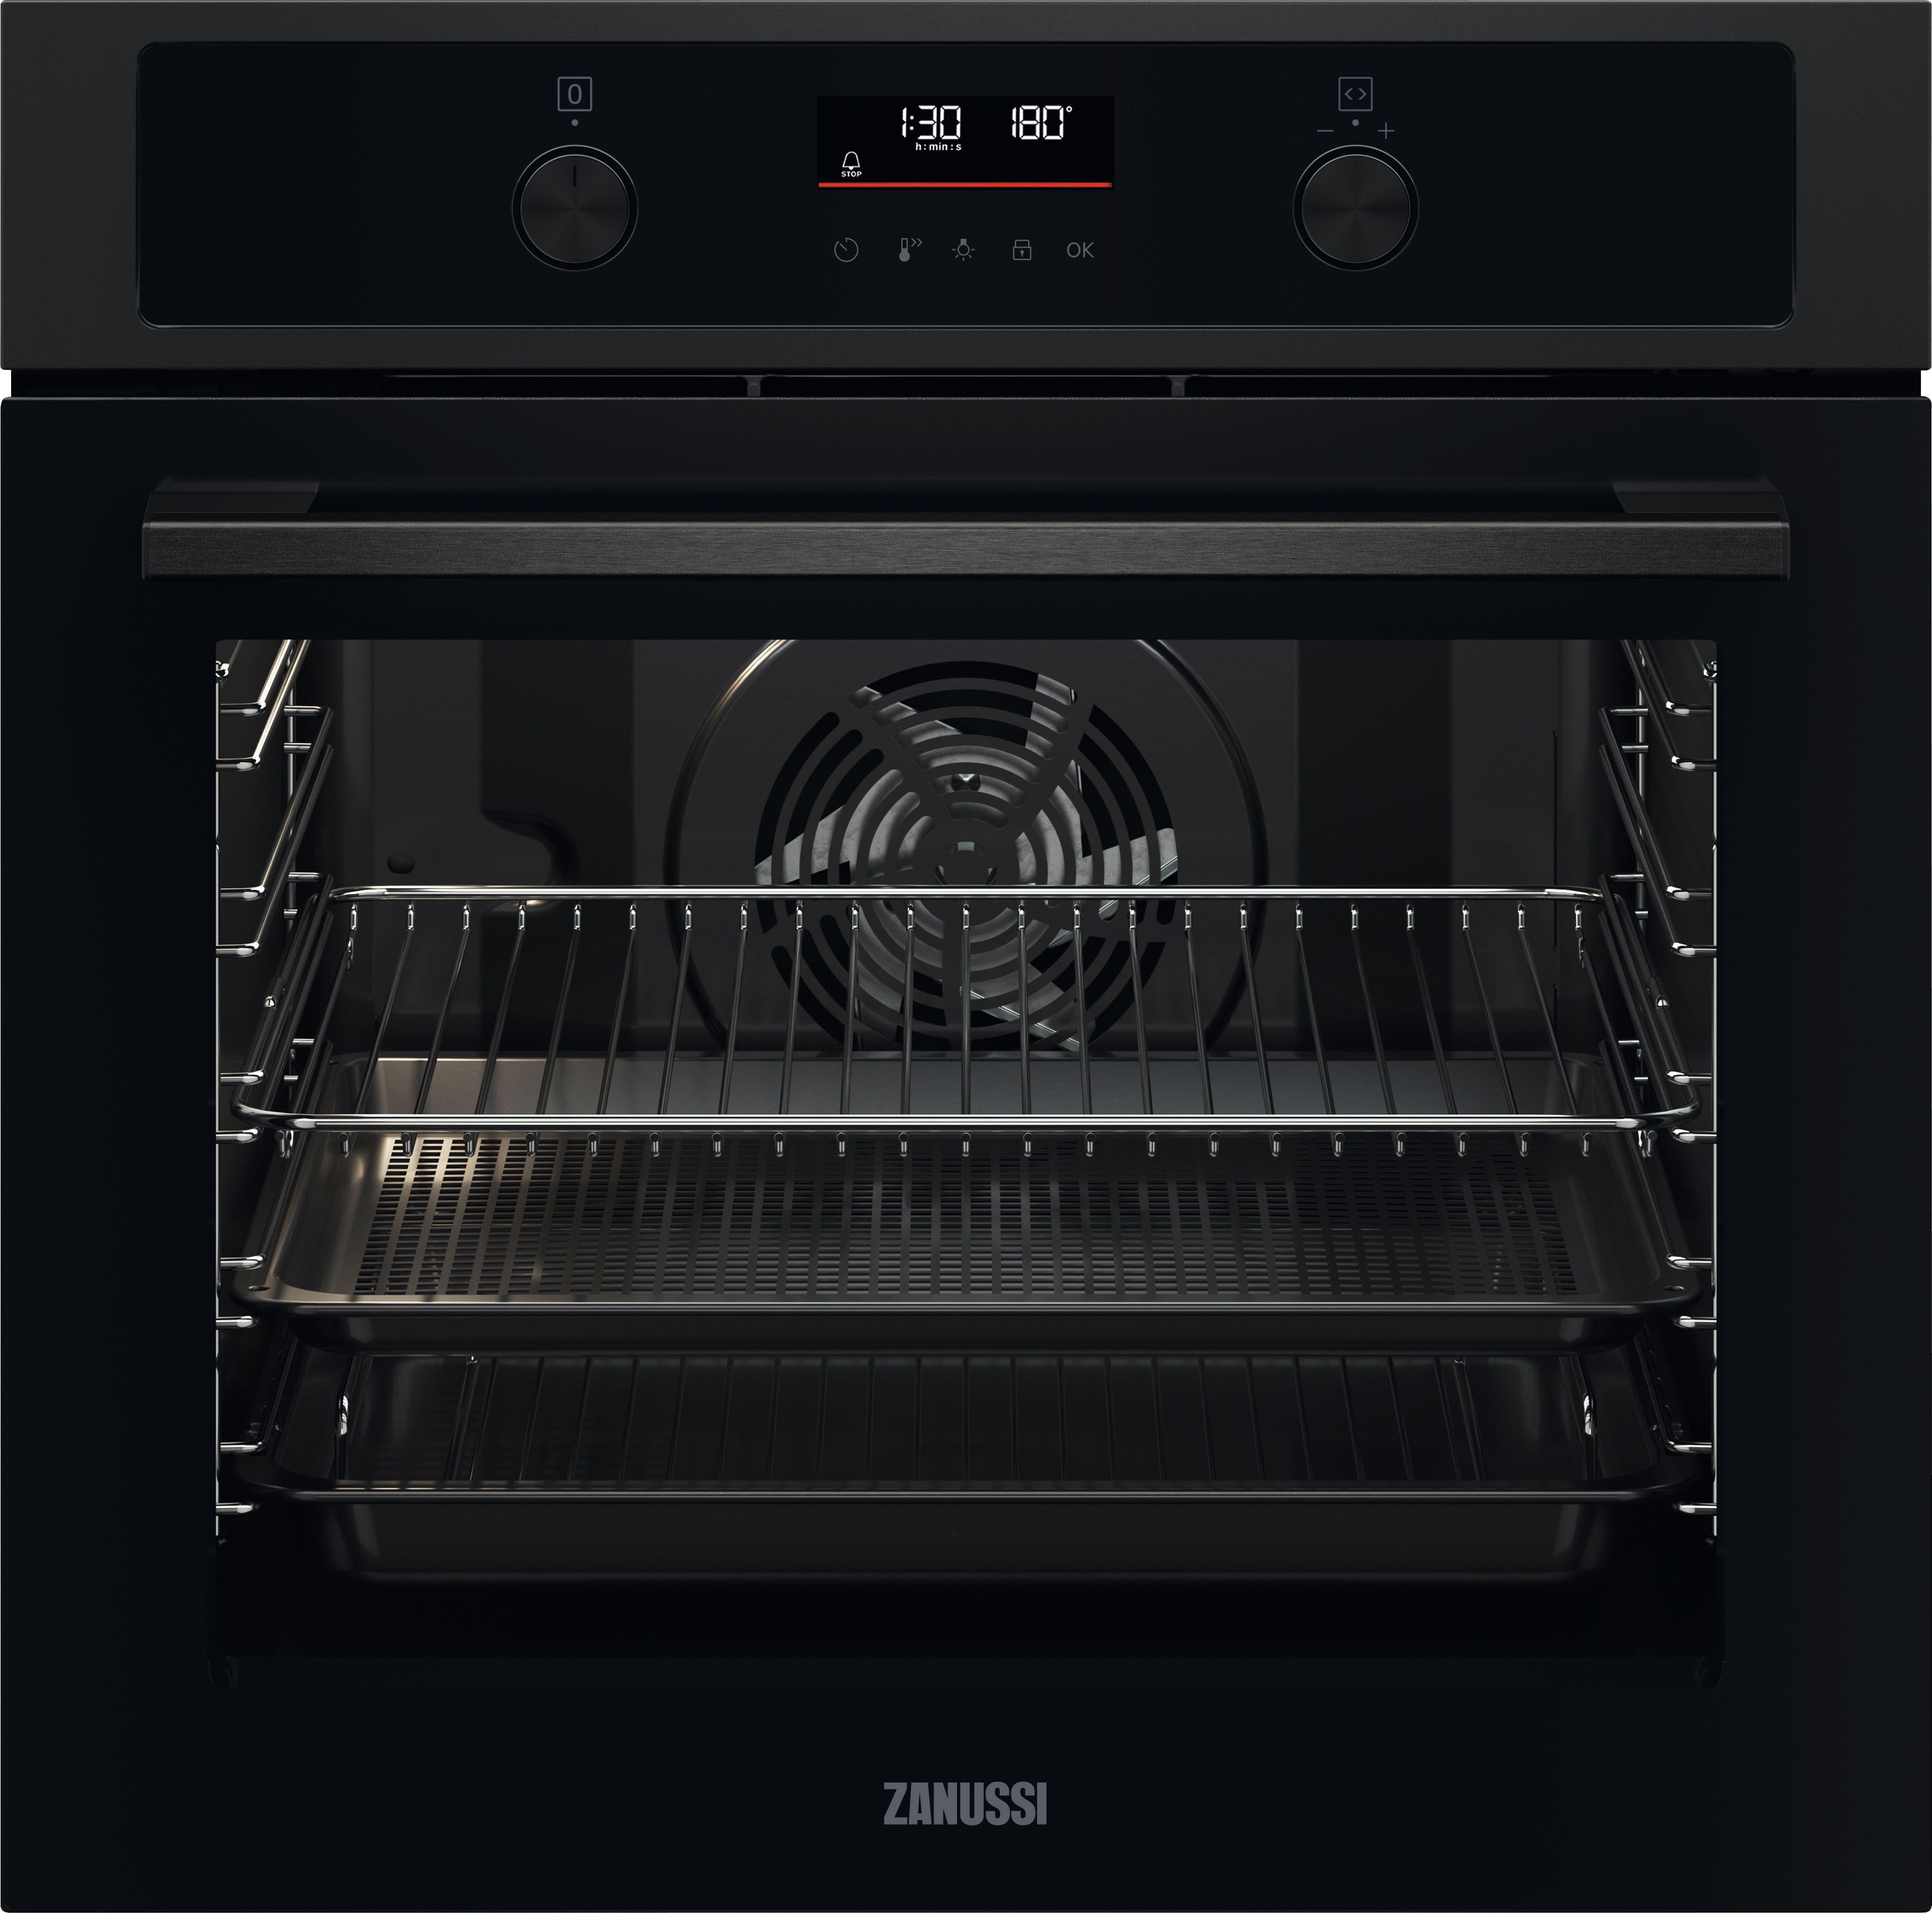 Zanussi ZOPNA7KN Built In Electric Single Oven and Pyrolytic Cleaning - Black - A+ Rated, Black